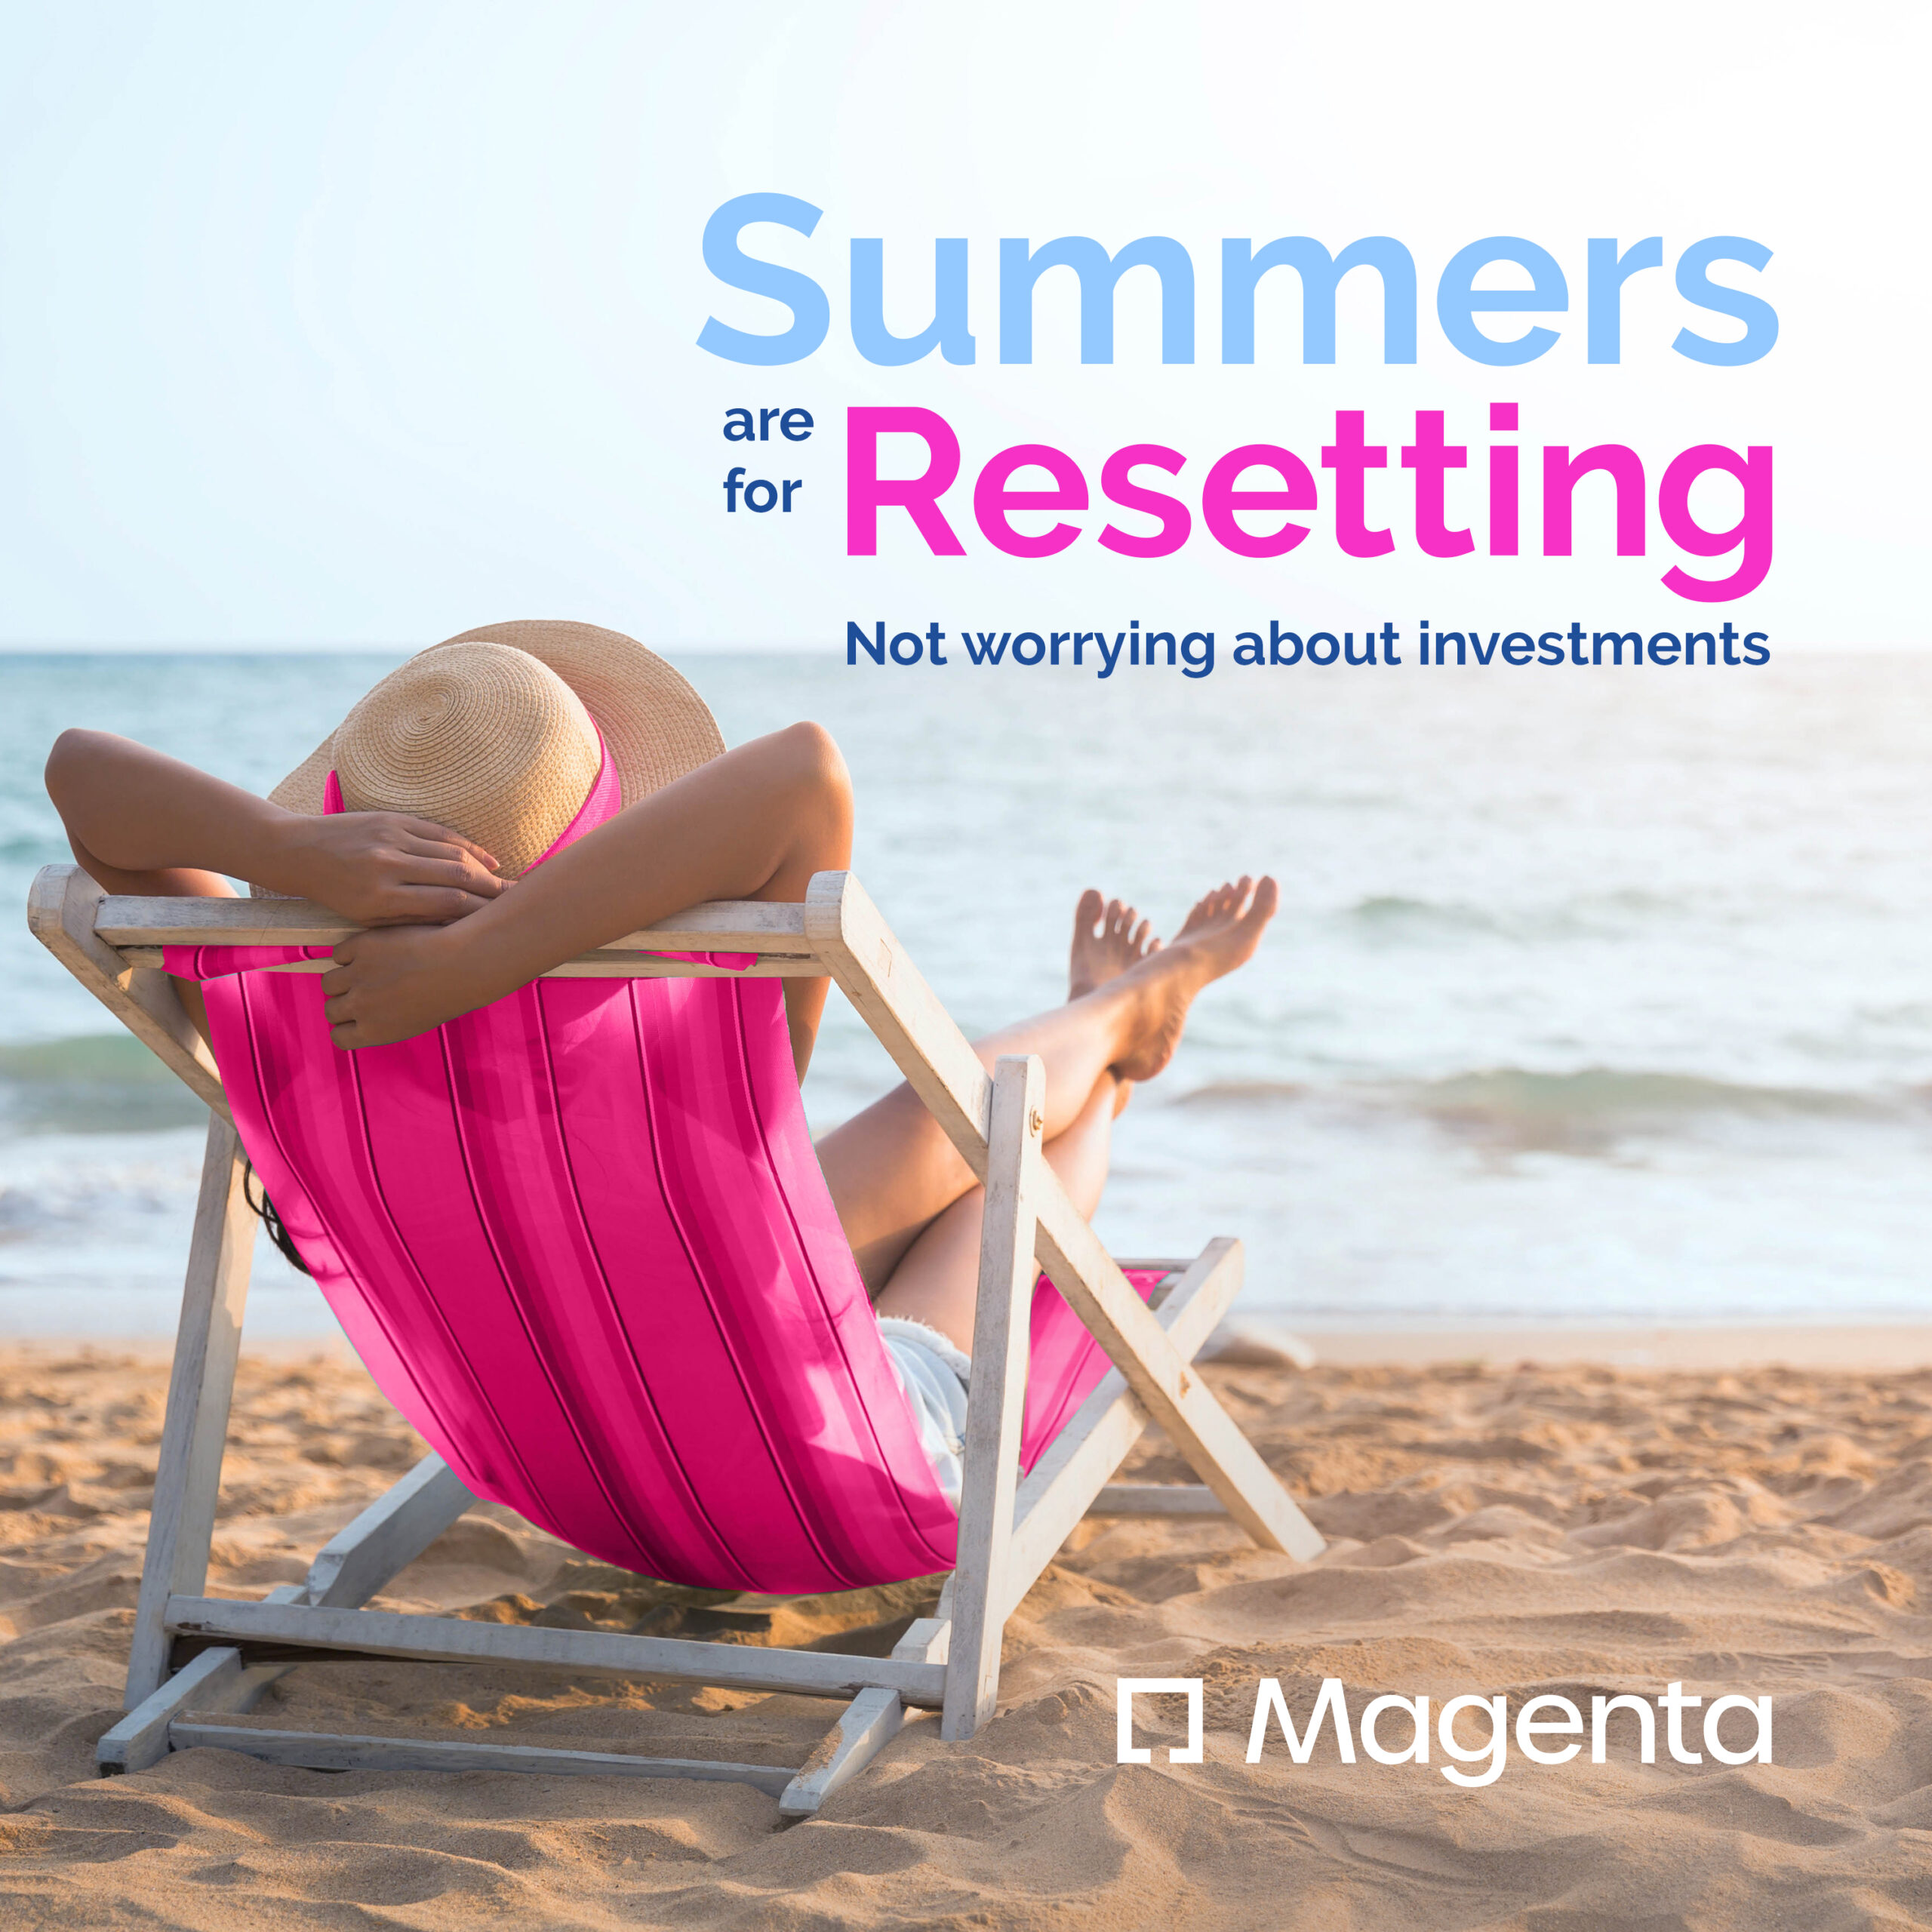 Three decades of carefree summers for our investors